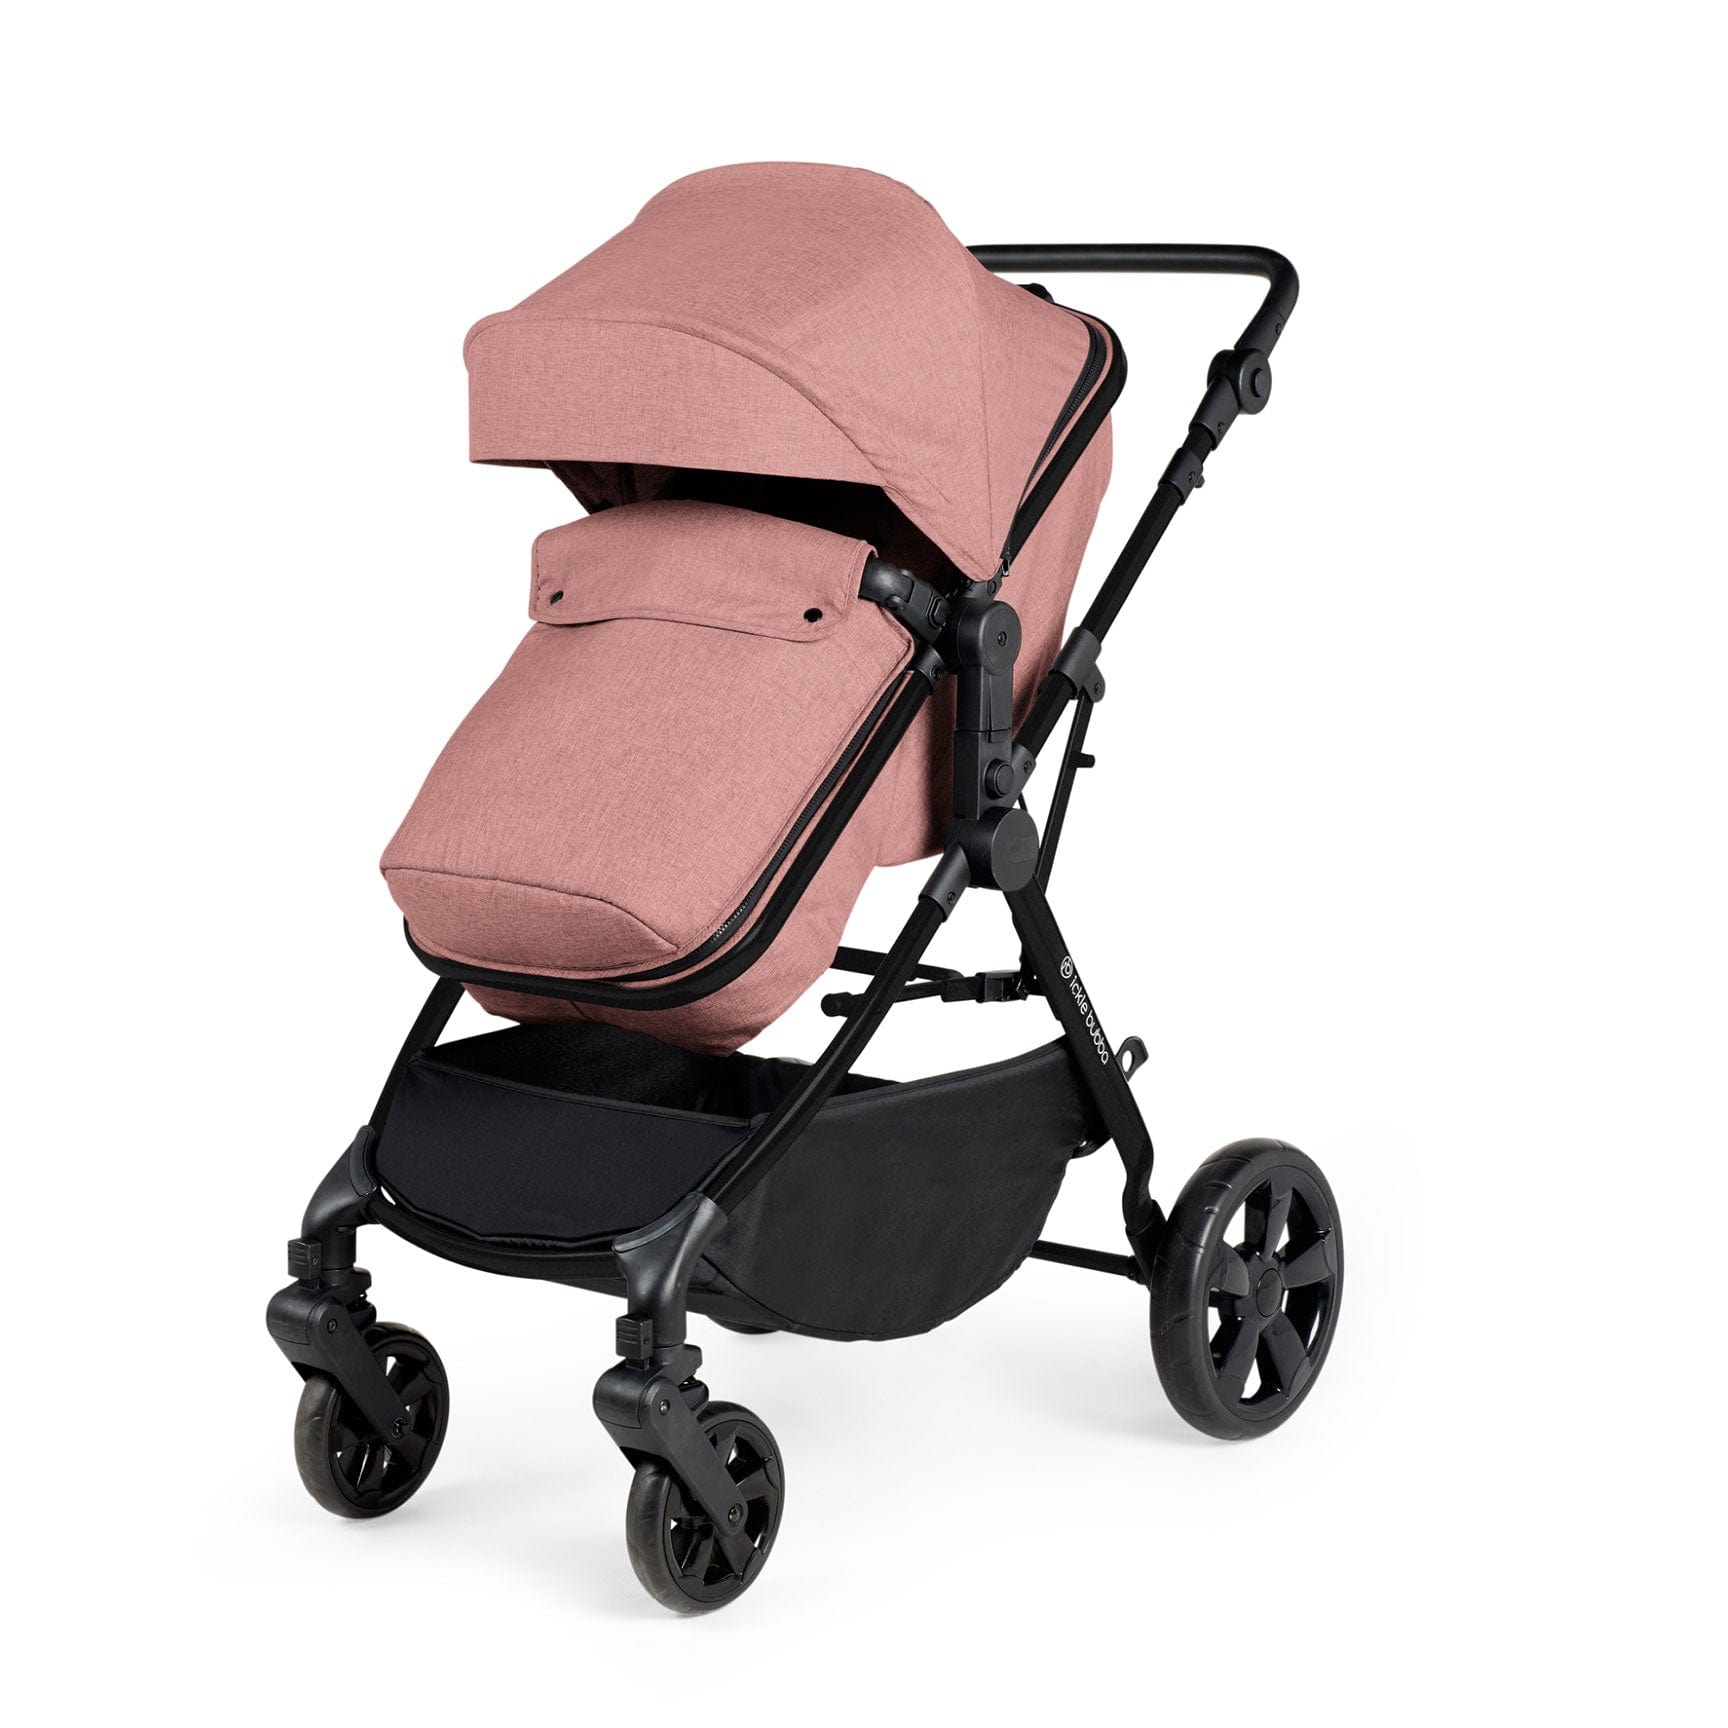 Ickle Bubba baby prams Ickle Bubba Comet 3-in-1 Travel System with Astral Car Seat - Dusty Pink 10-008-101-134